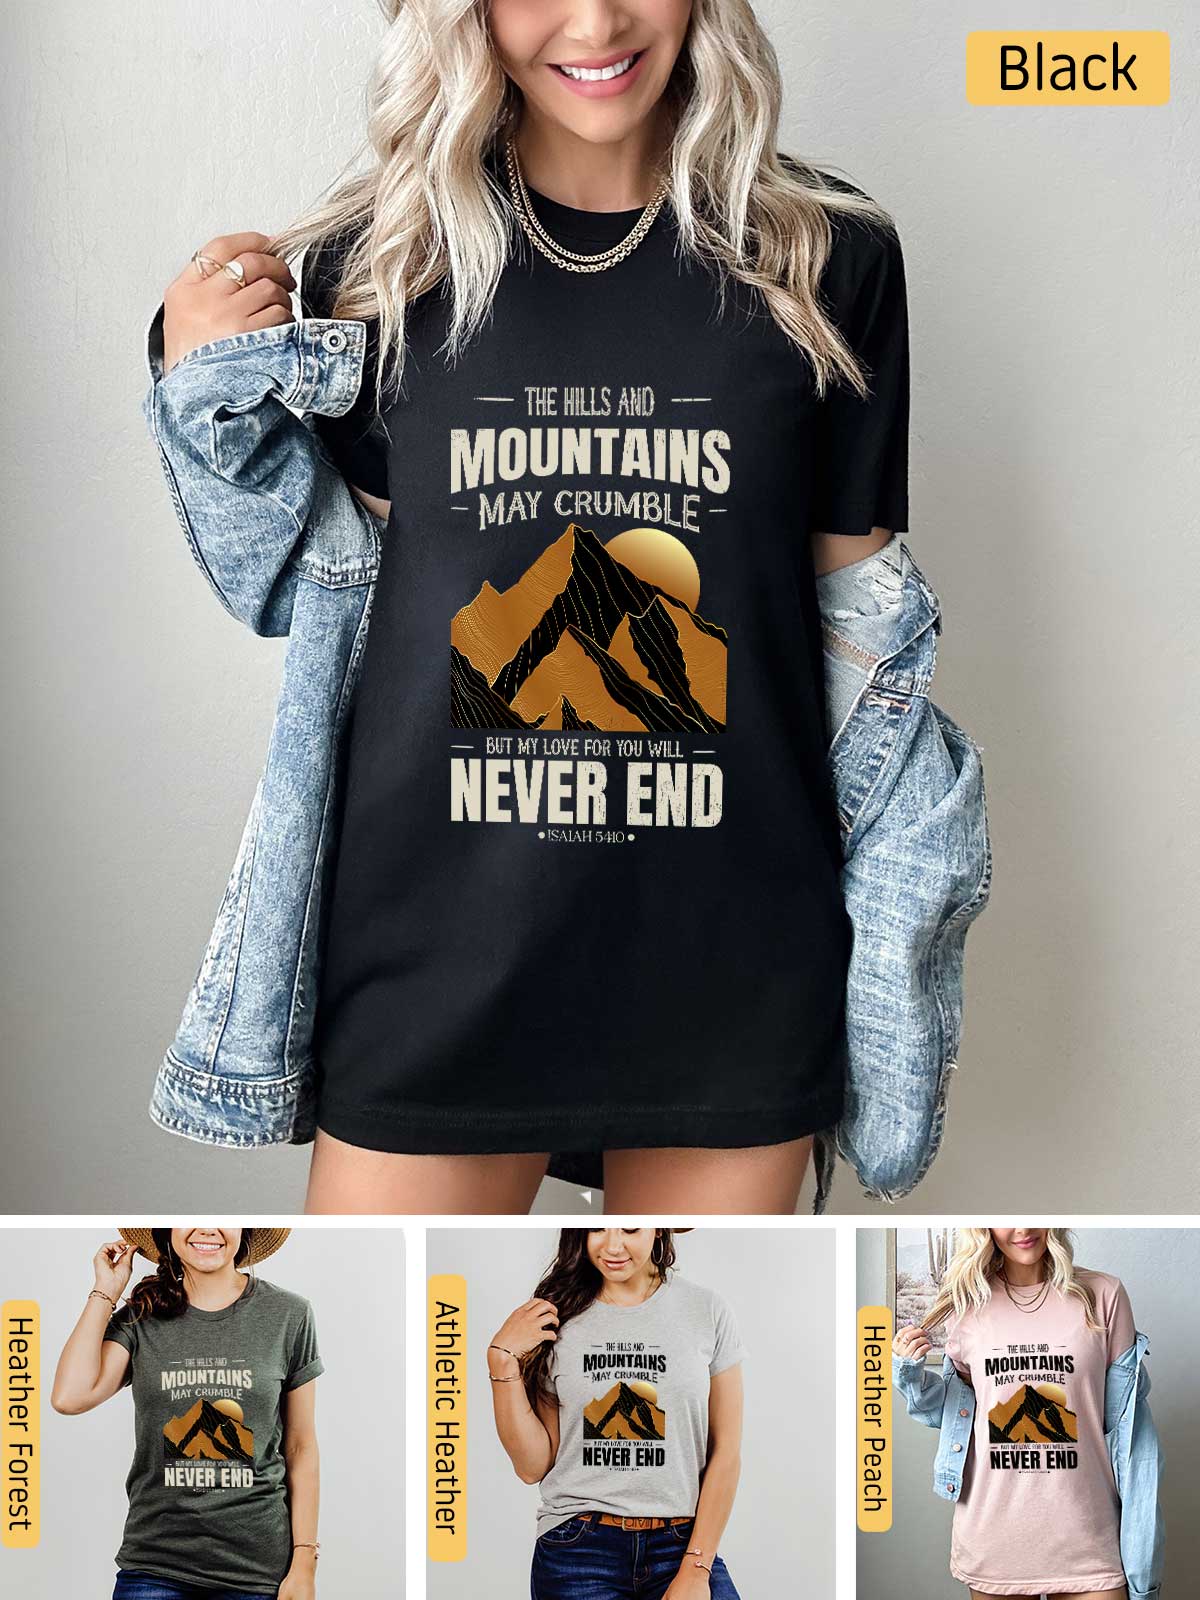 a woman wearing a black shirt with mountains on it